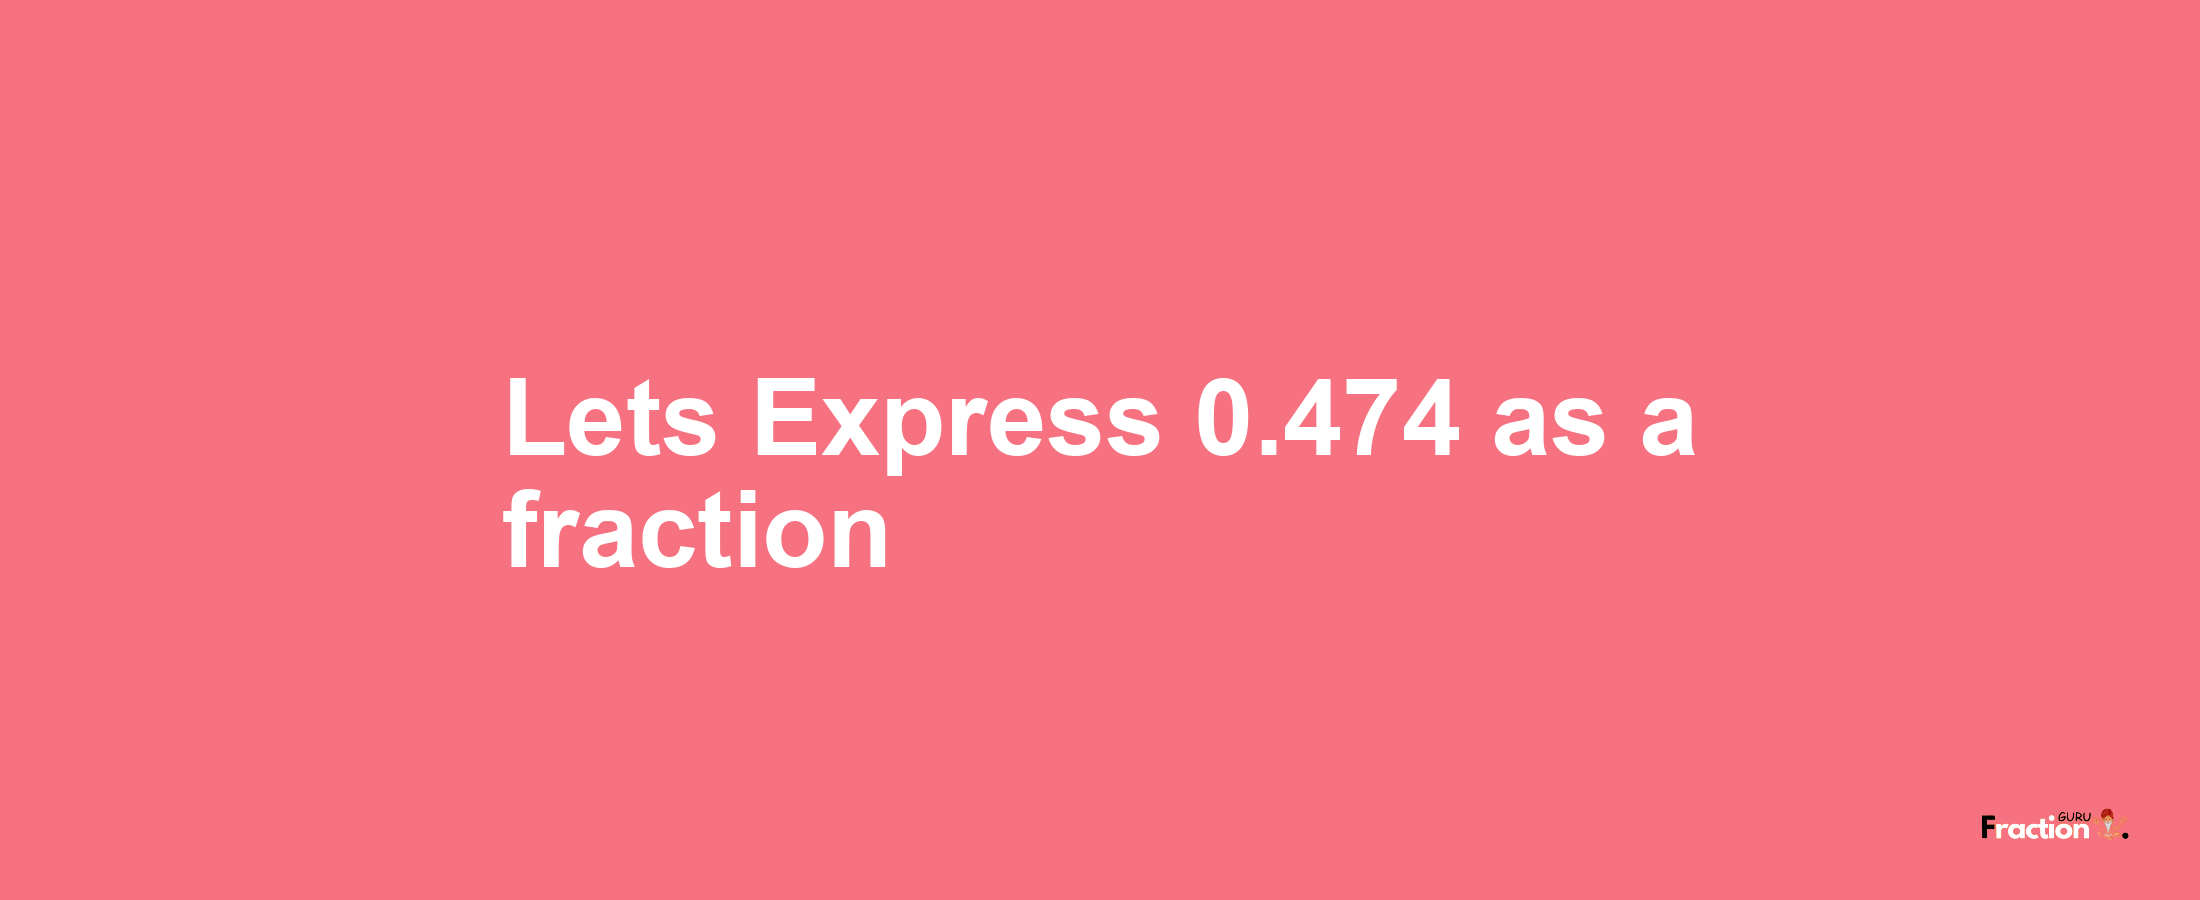 Lets Express 0.474 as afraction